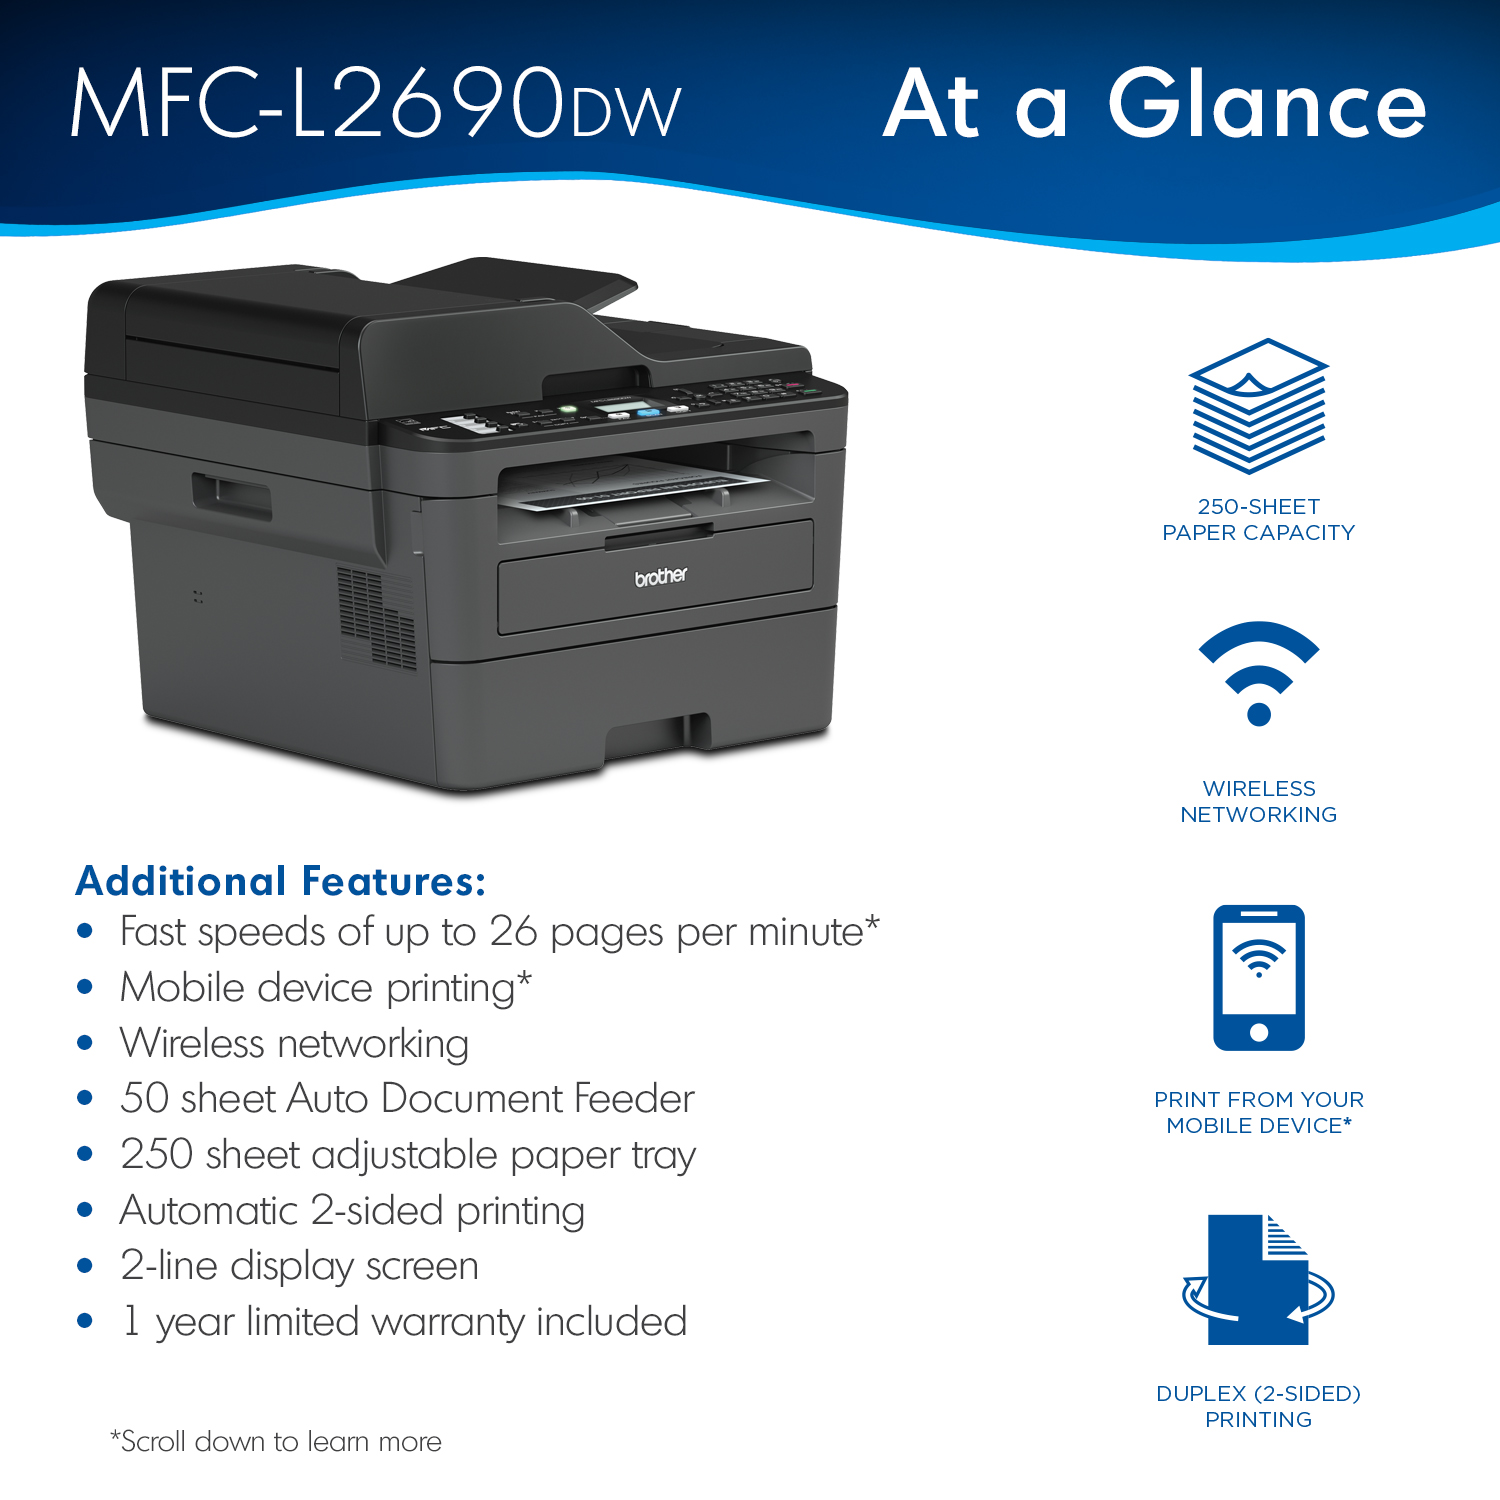 Brother MFC-L2690DW Monochrome Laser All-in-One Printer, Duplex Printing, Wireless Connectivity - image 2 of 10